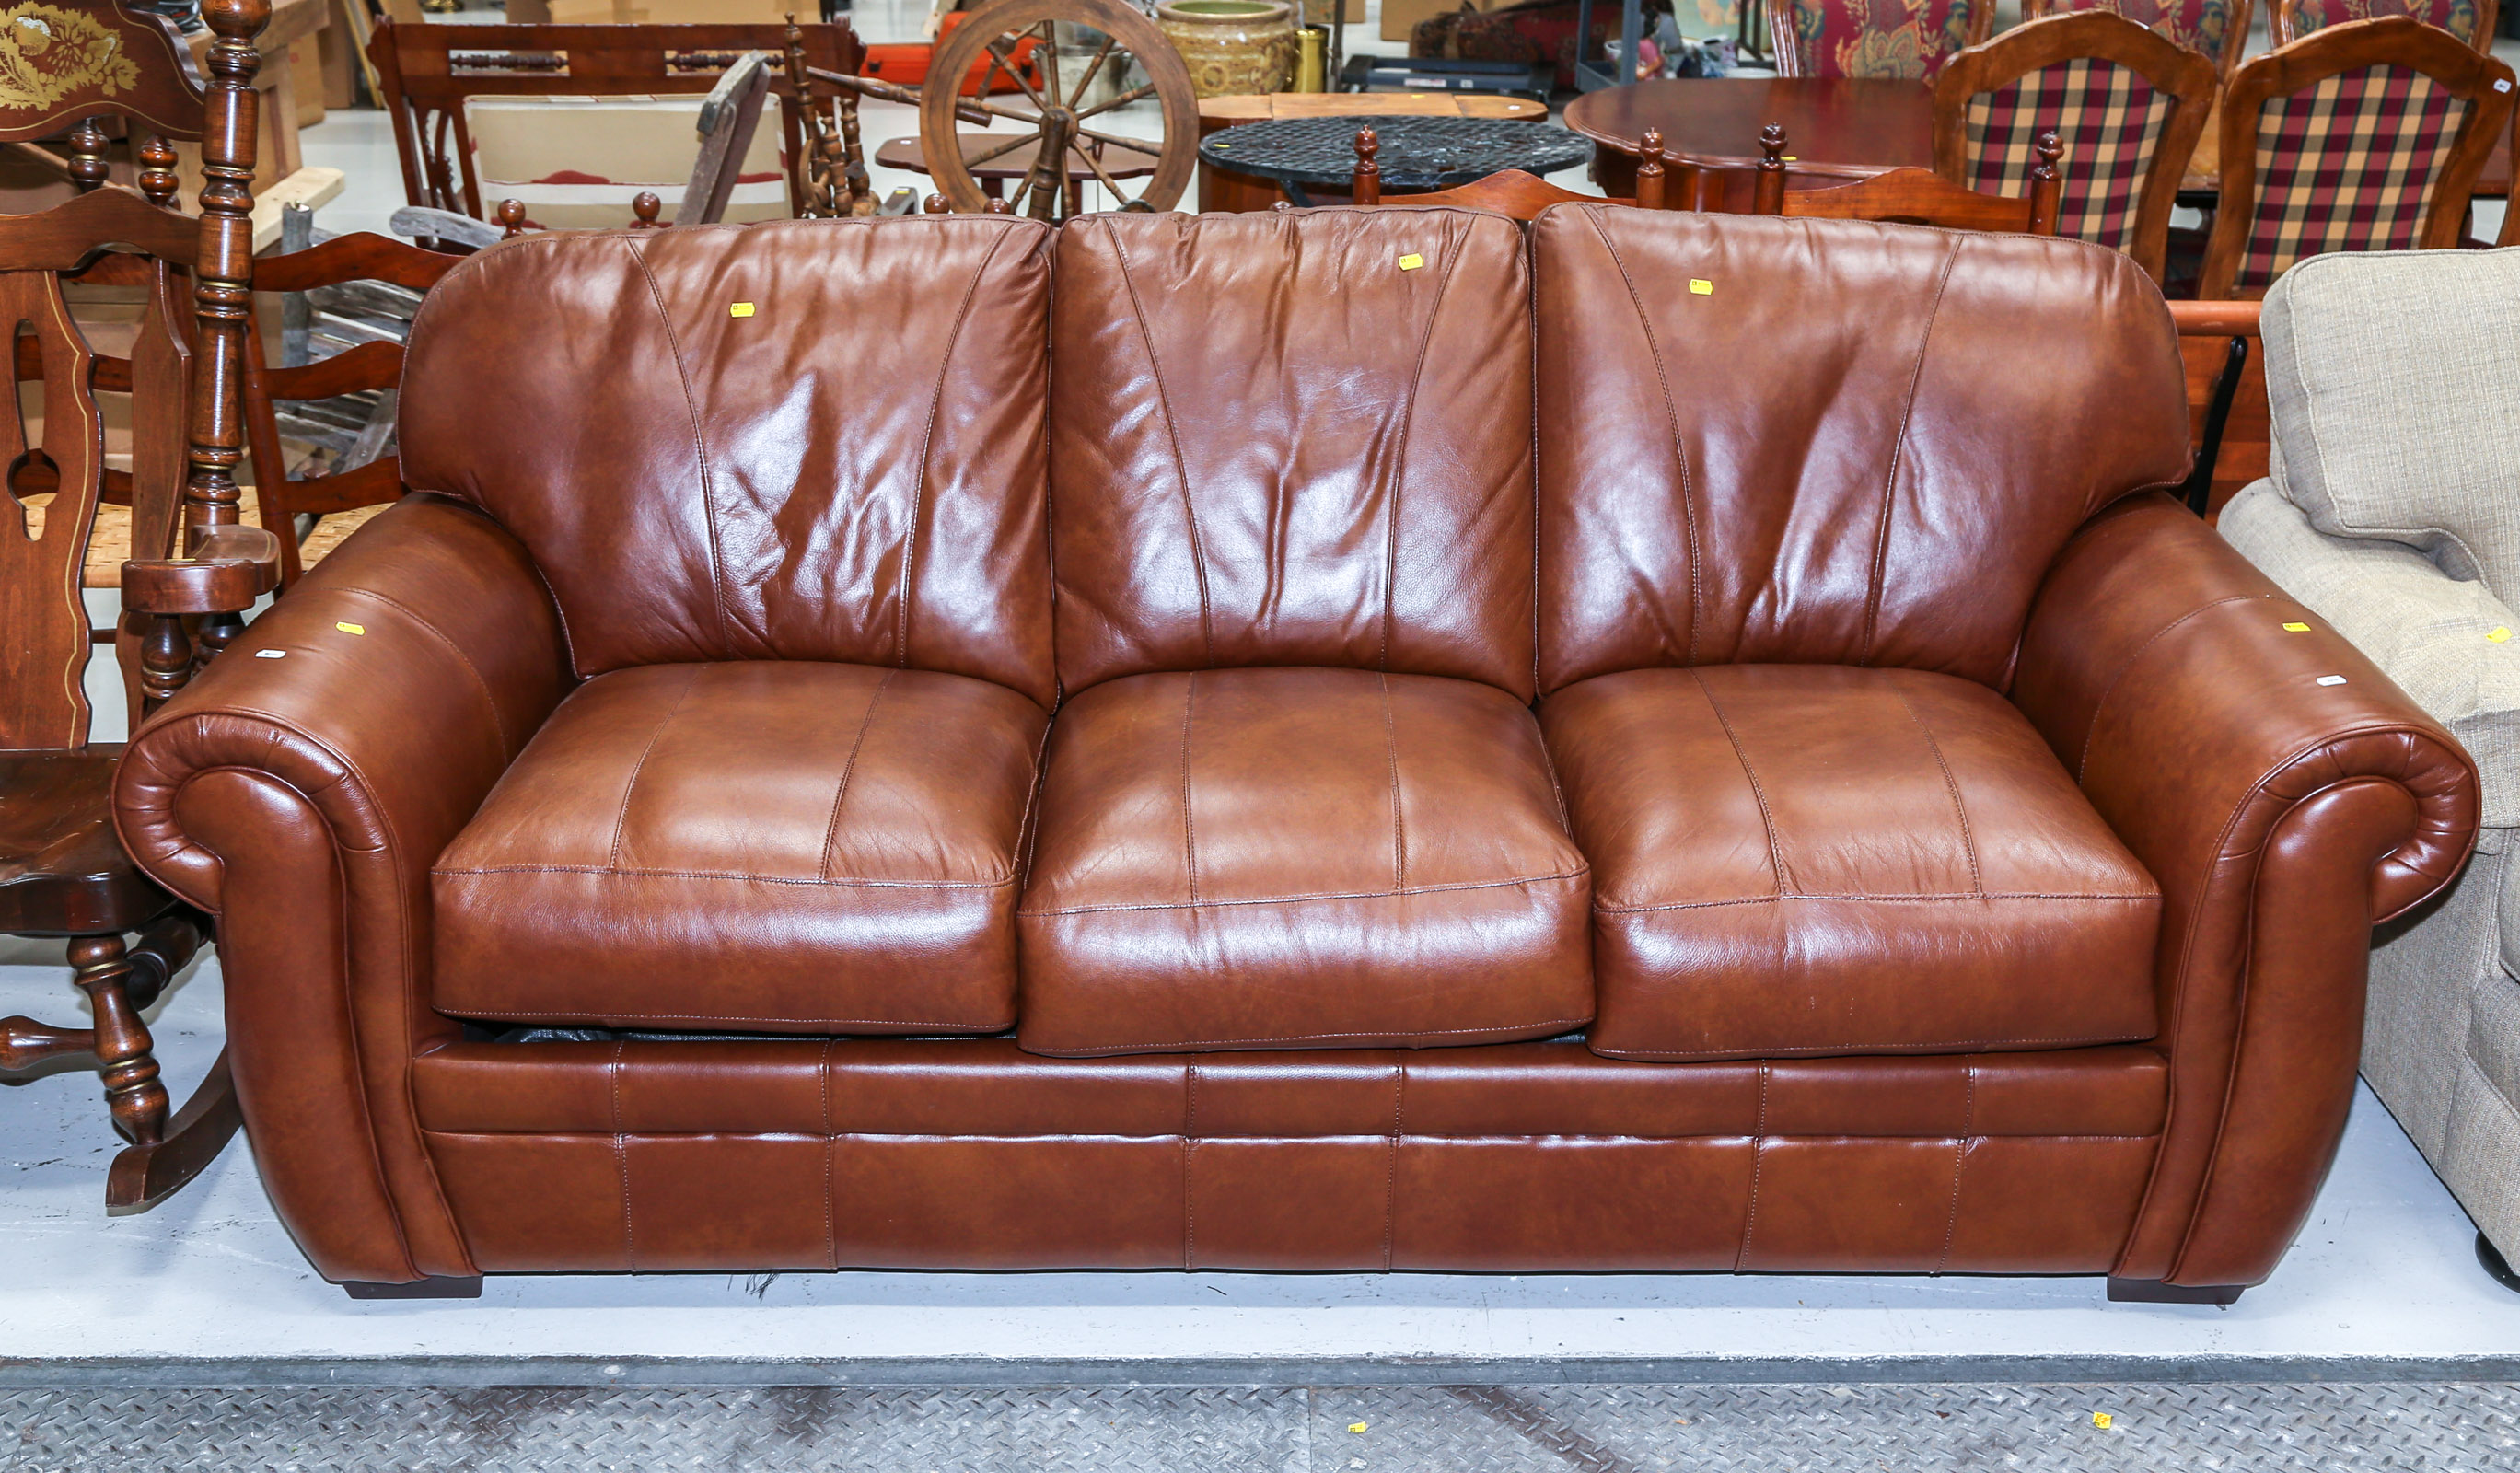 CONTEMPORARY STYLE LEATHER SLEEPER